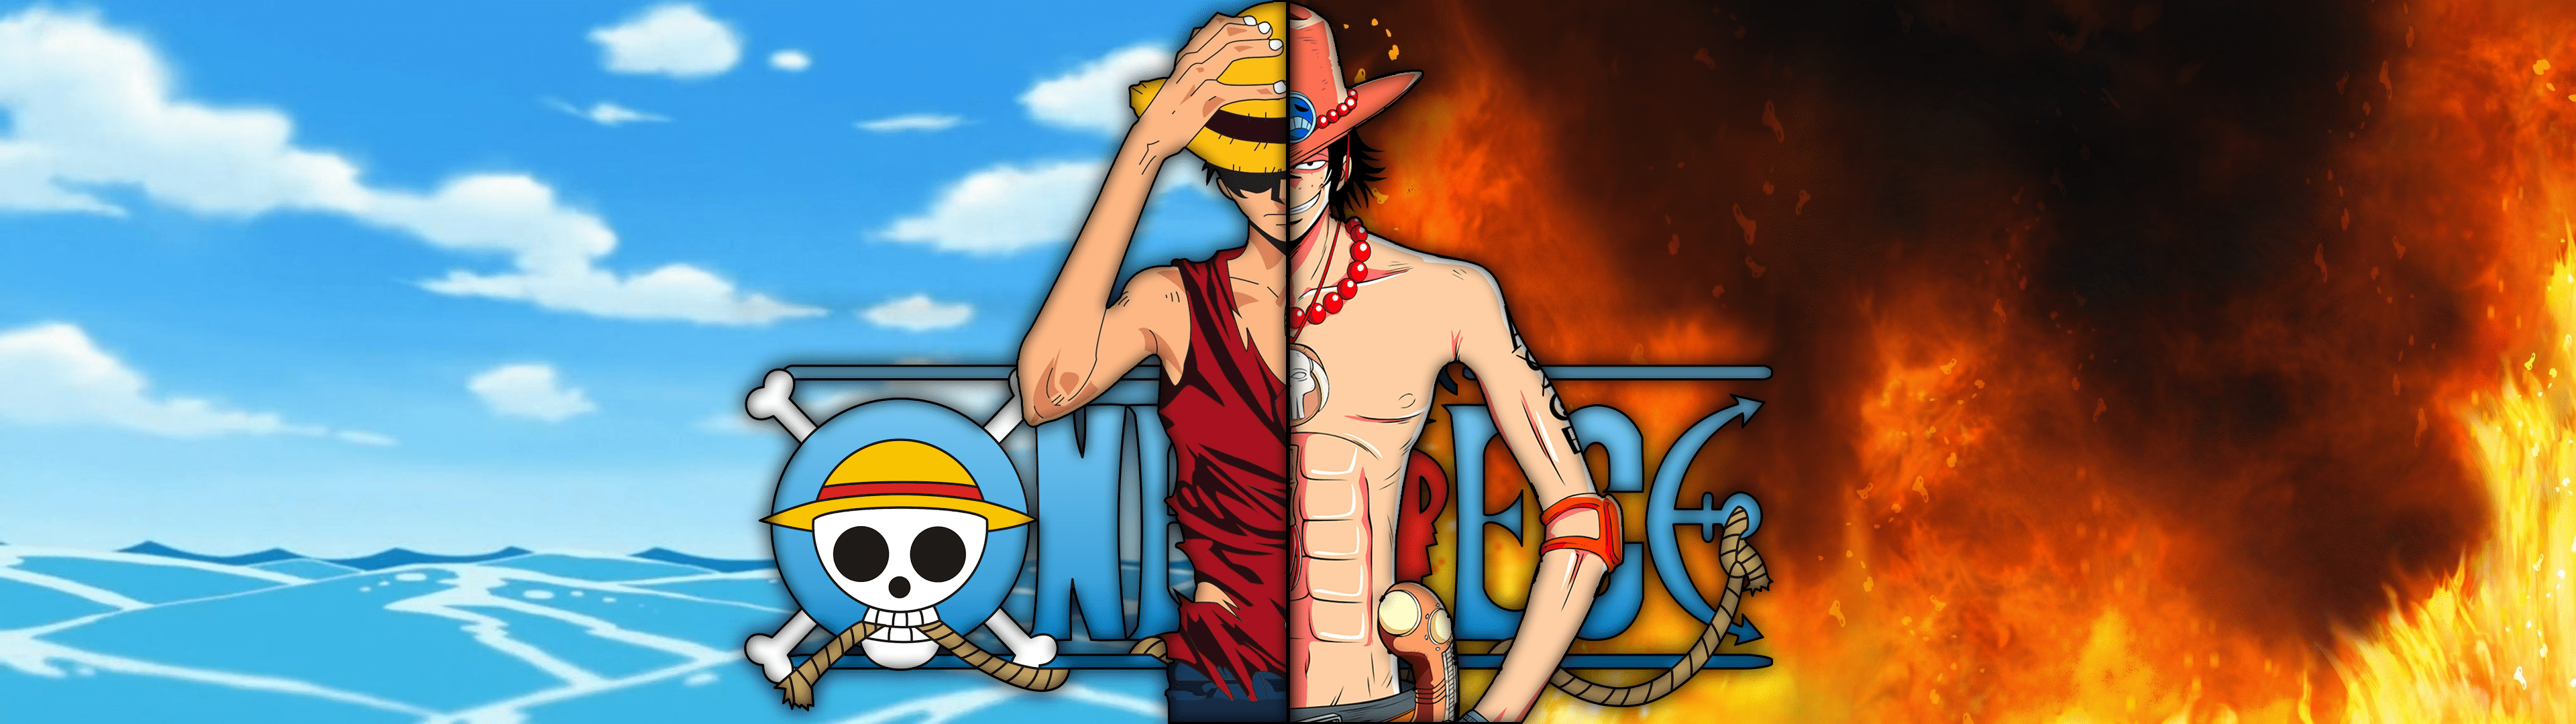 3840X1080 One Piece Wallpapers - Top Free 3840X1080 One Piece ...